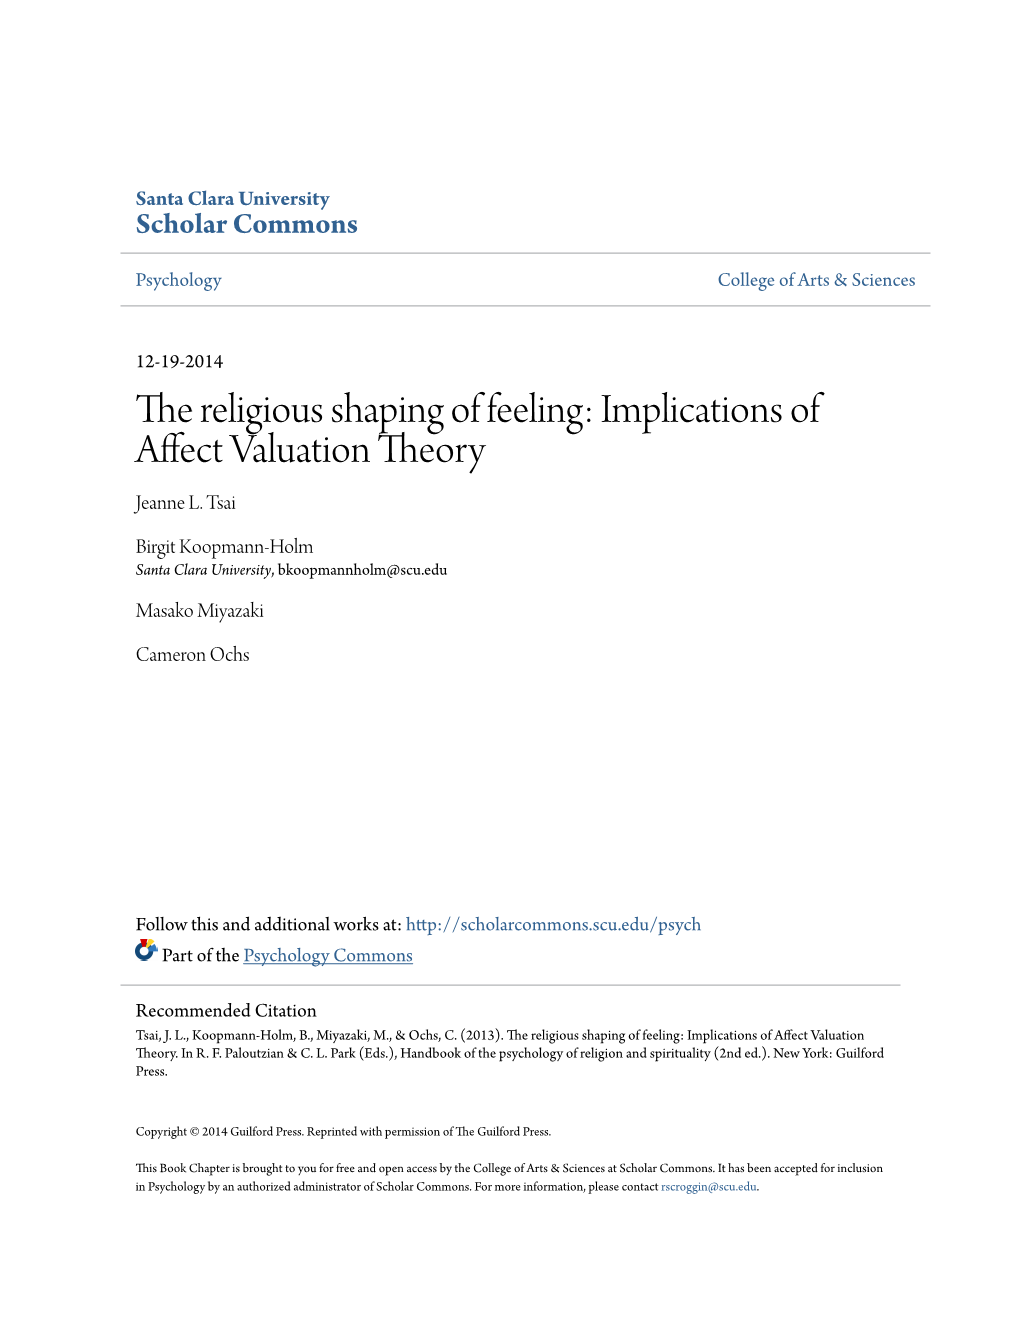 The Religious Shaping of Feeling: Implications of Affect Valuation Theory